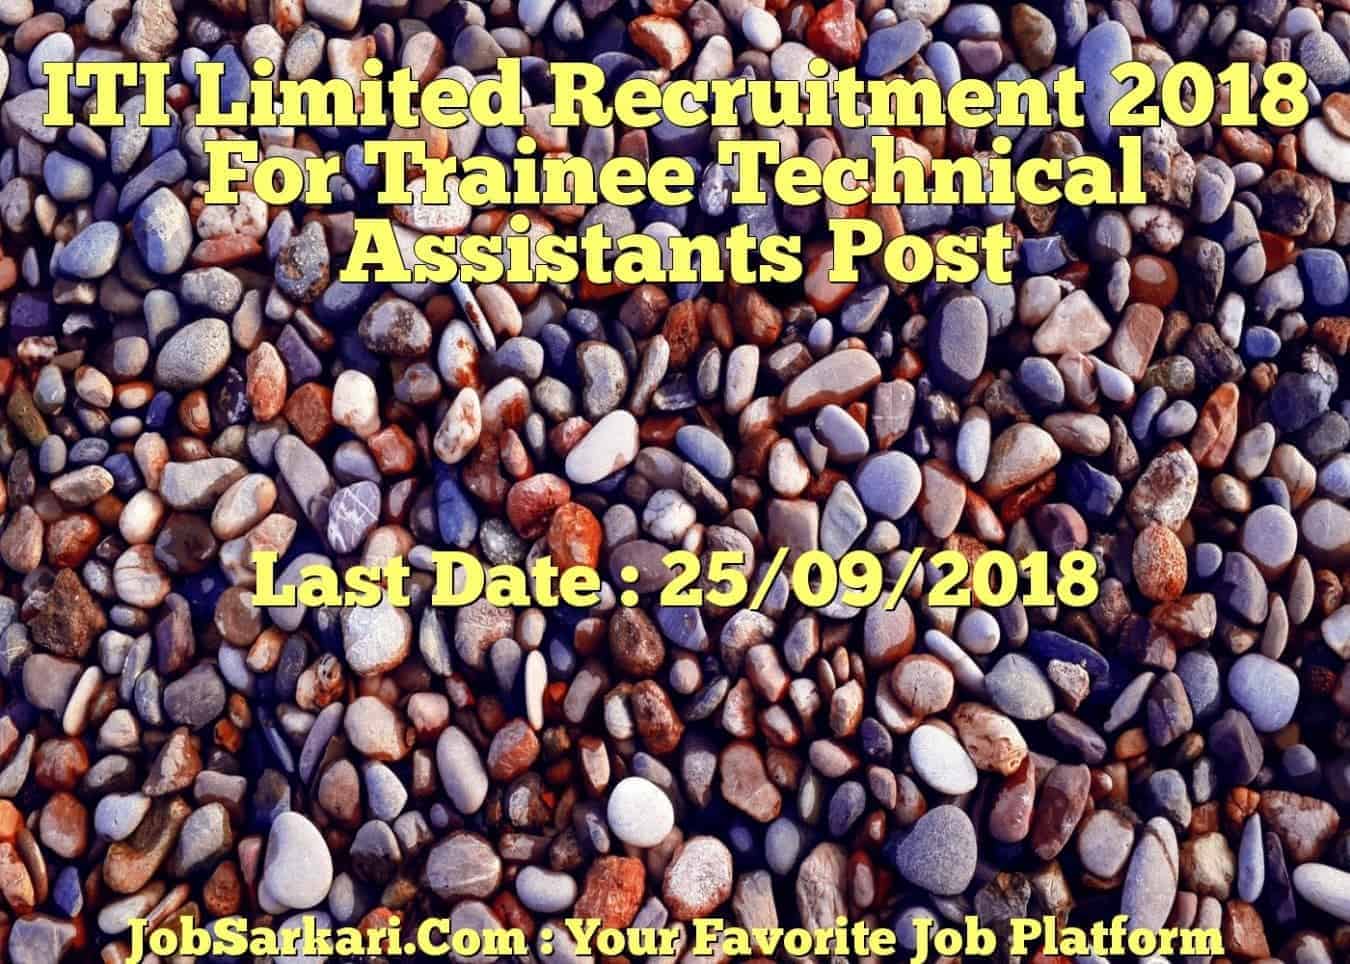 ITI Limited Recruitment 2018 For Trainee Technical Assistants Post